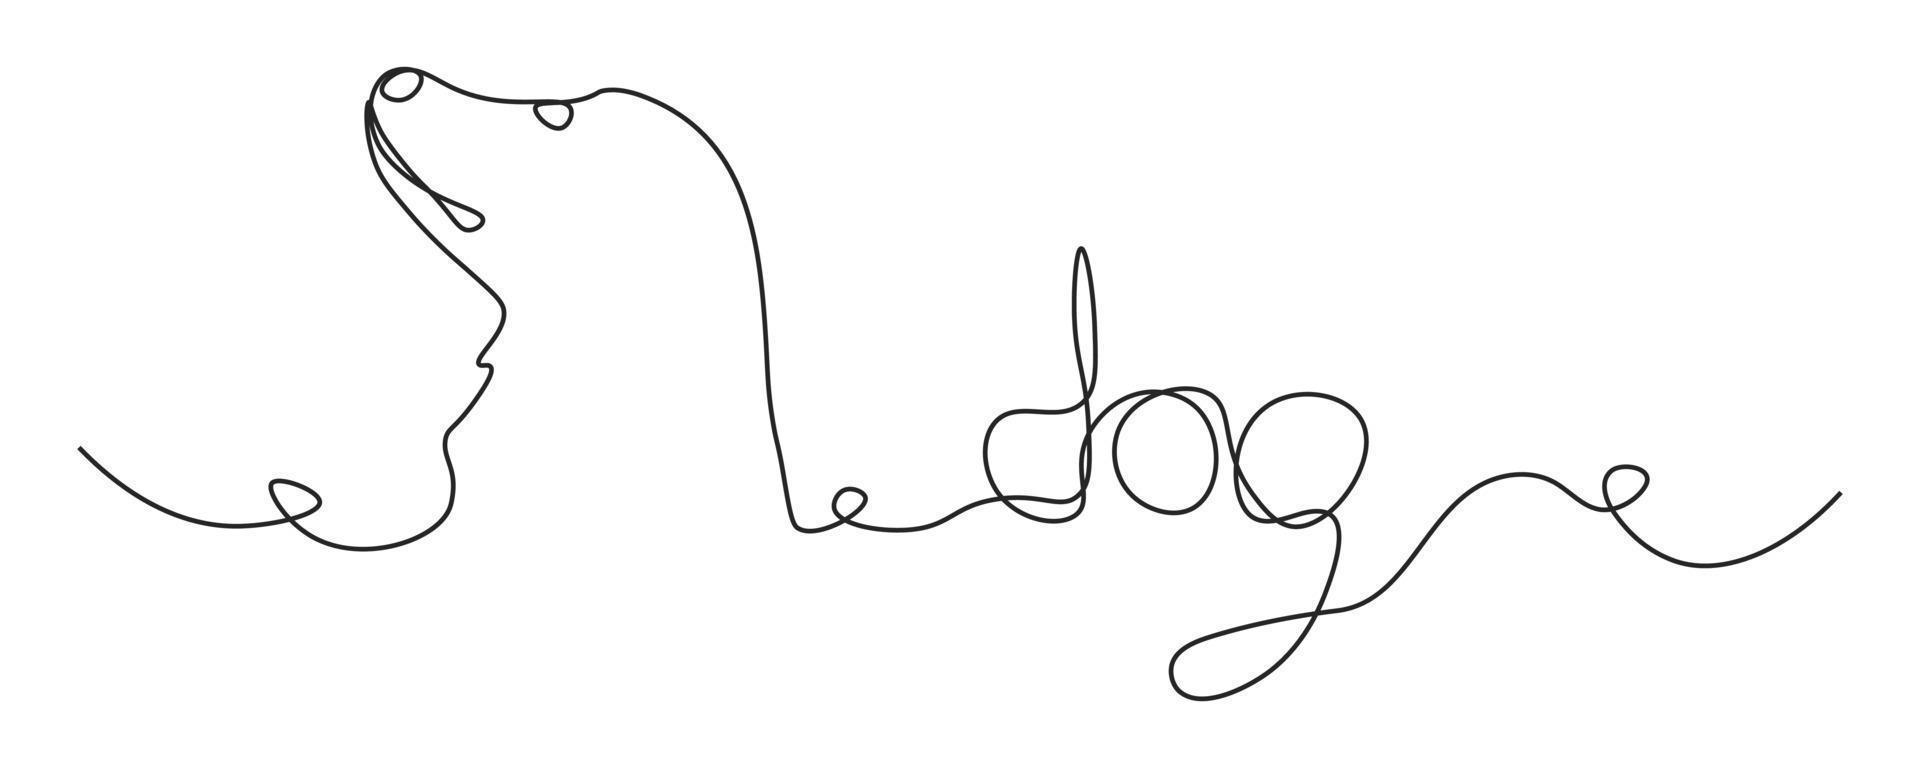 Dog drawing vector single one line art style